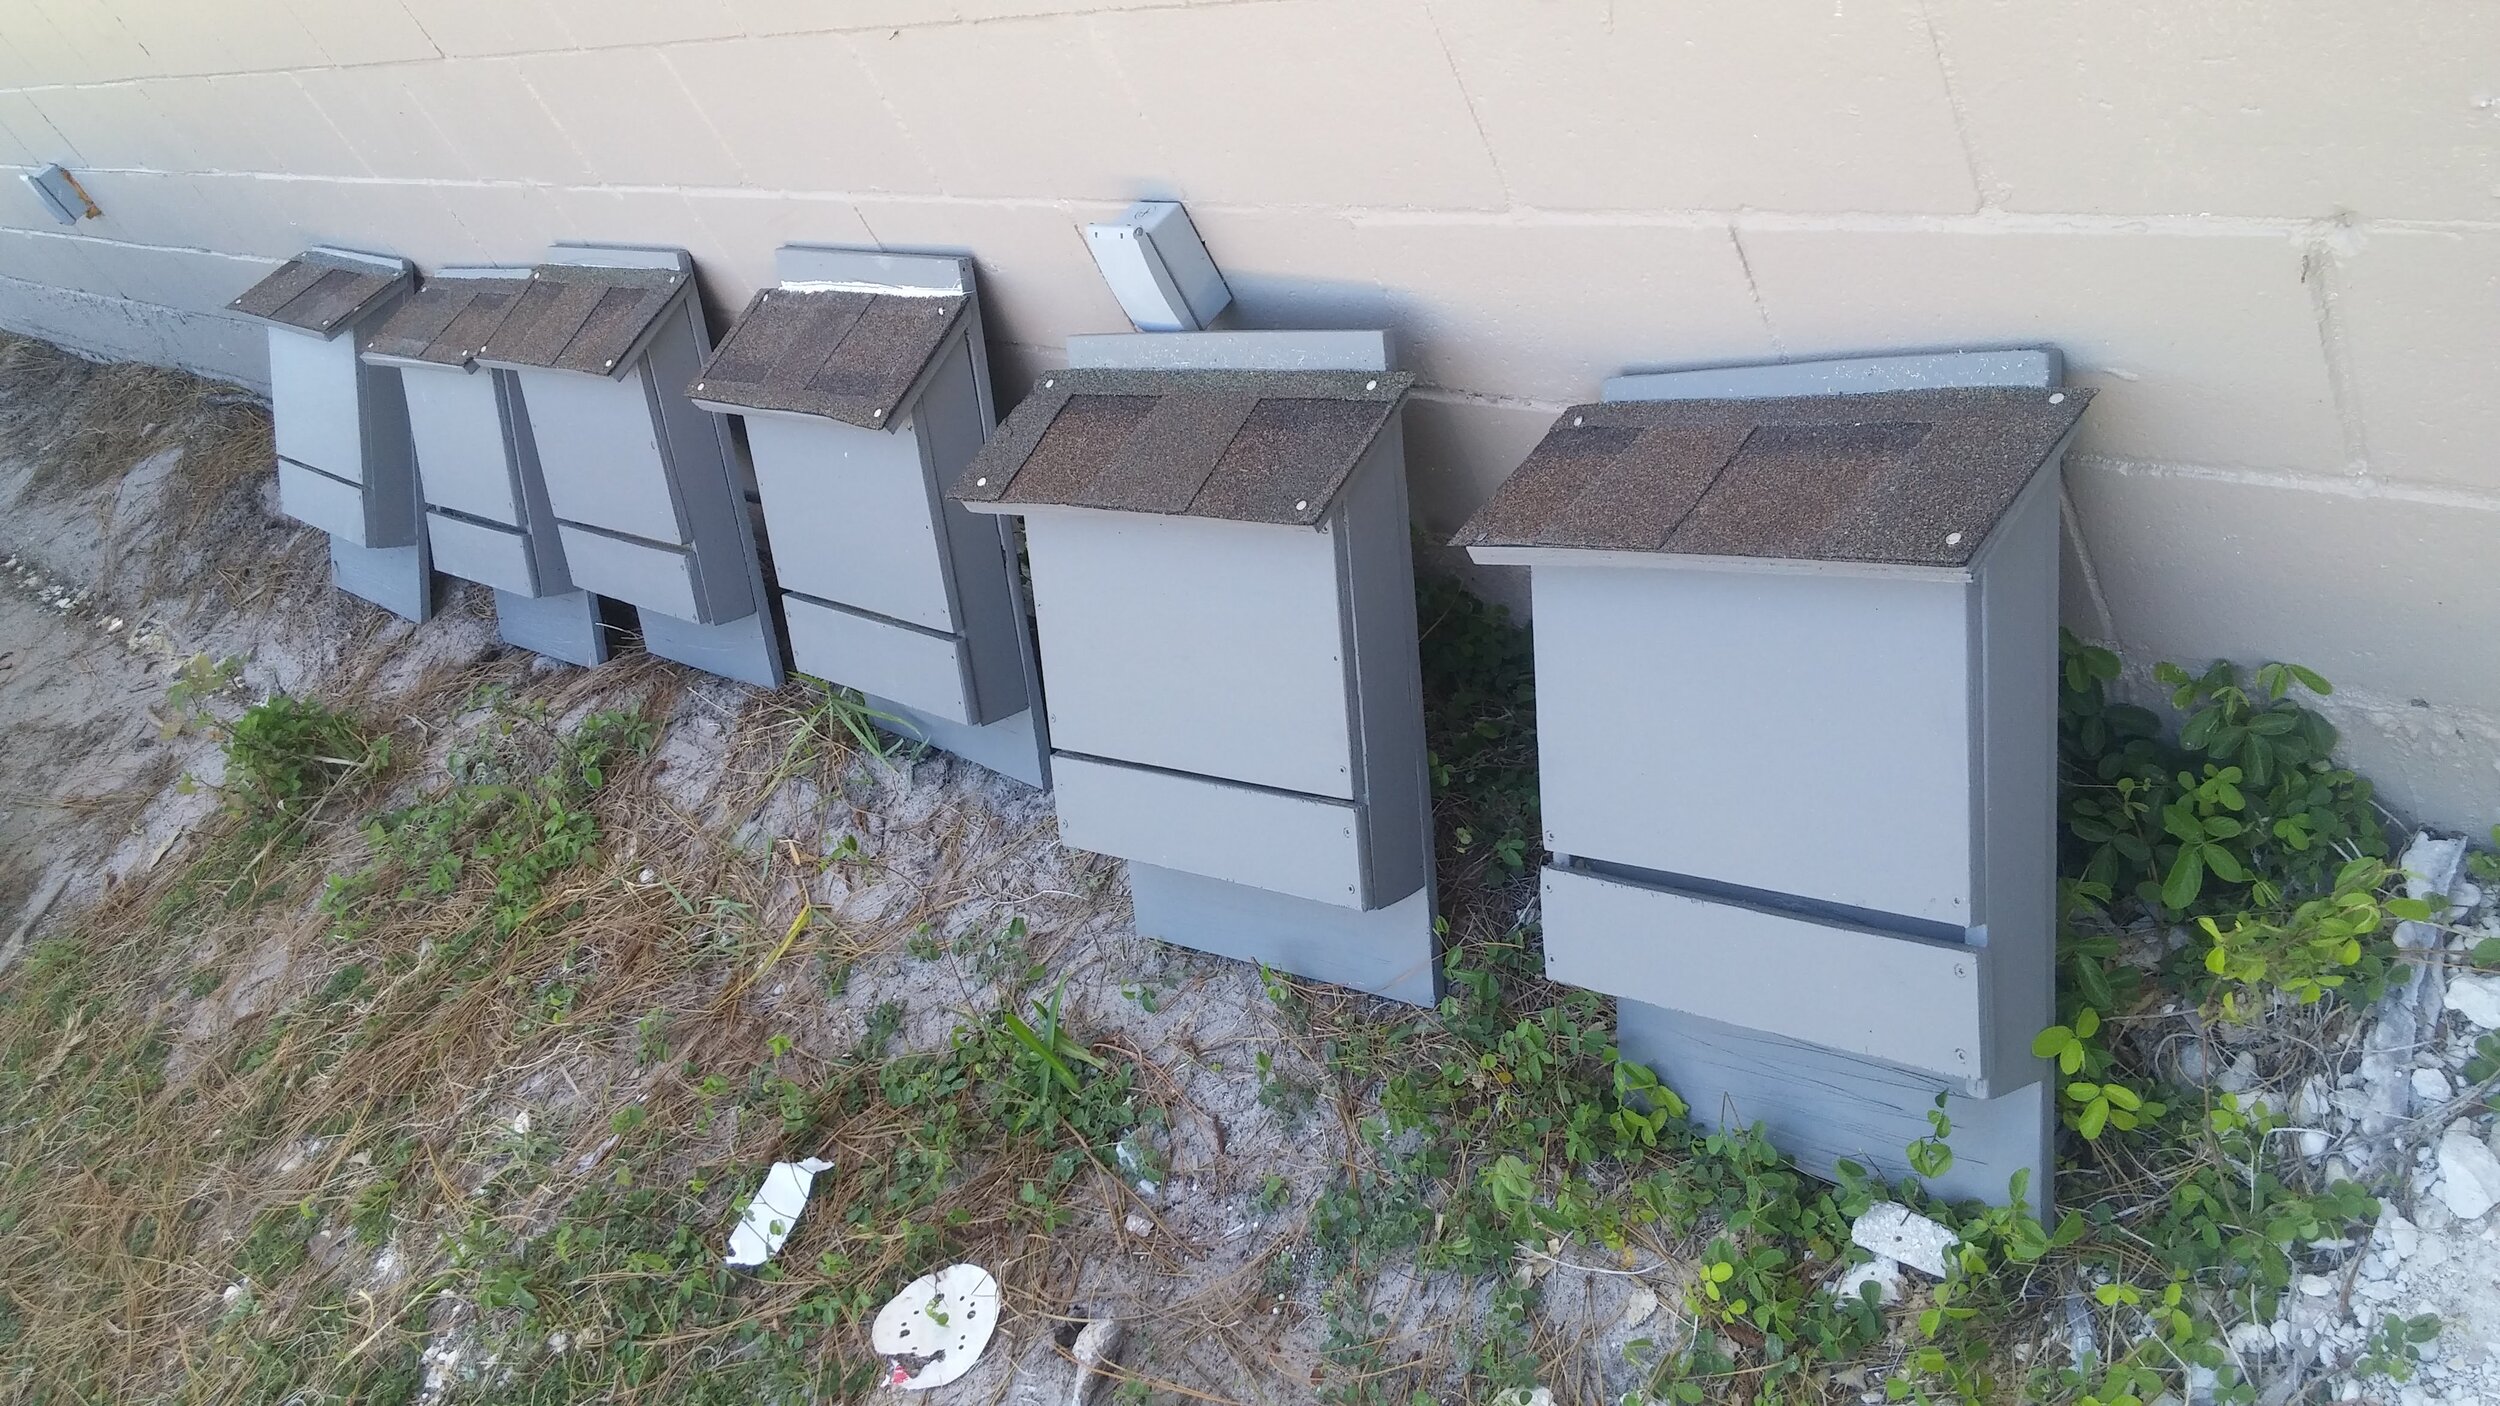 Six three-chamber Bat Houses Completed!